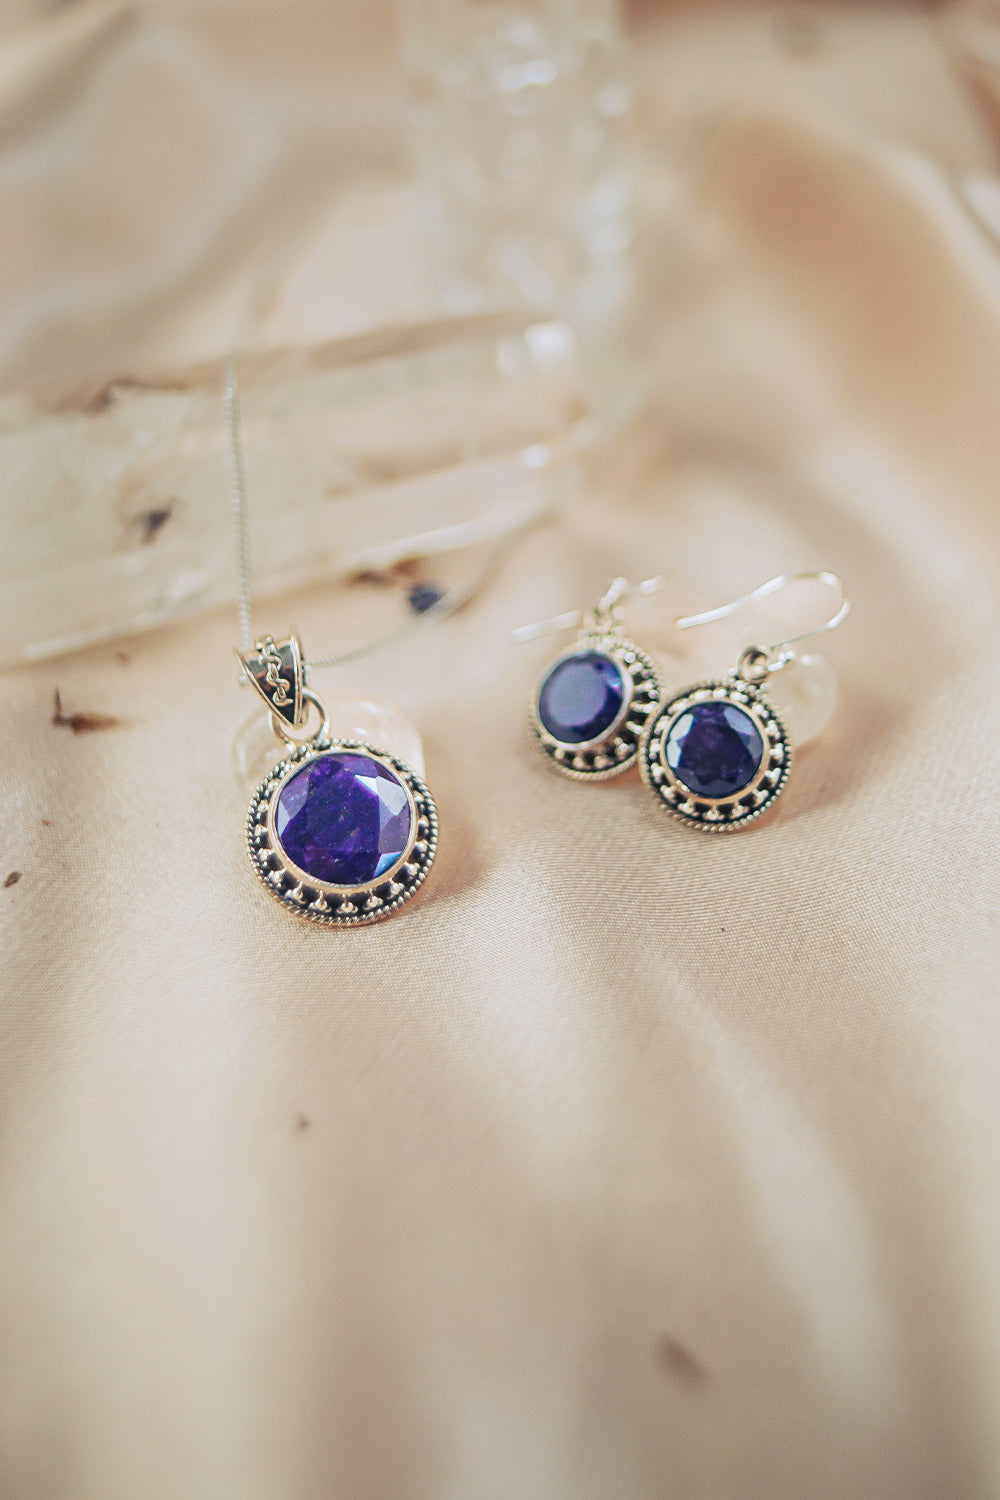 Raw Sapphire Silver Necklace and Earrings Jewelry Set  - Aurora